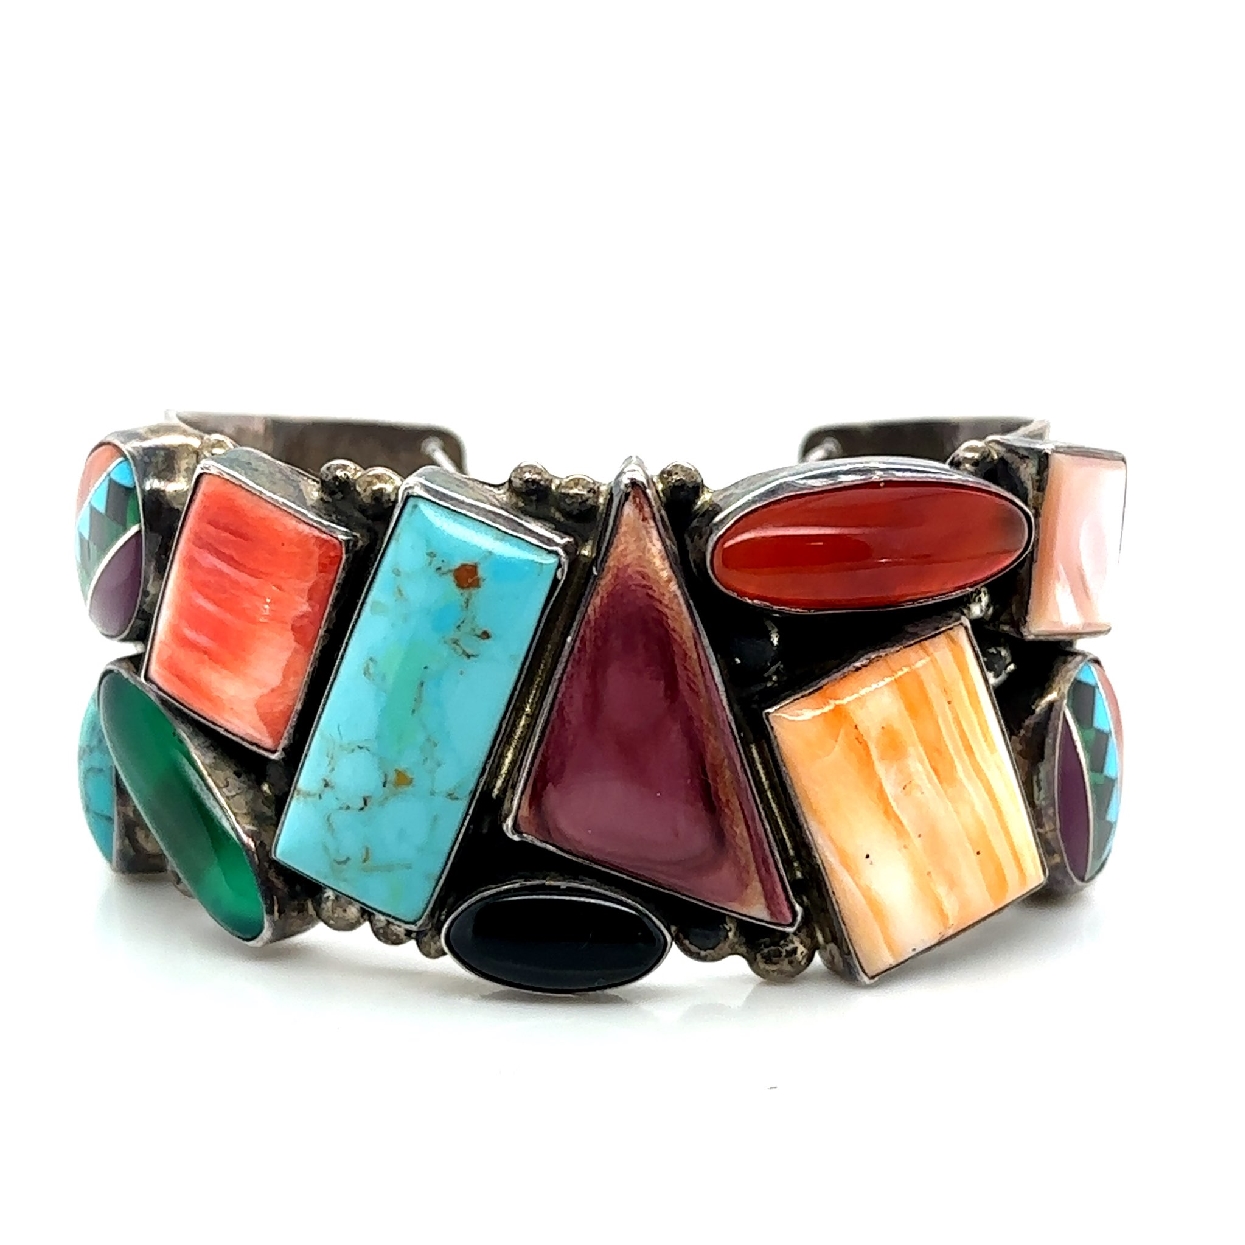 Native American Cuff with an assortment of stones including turquoise; coral; mother of pearl; malachite; carnelian; onyx; and green onyx